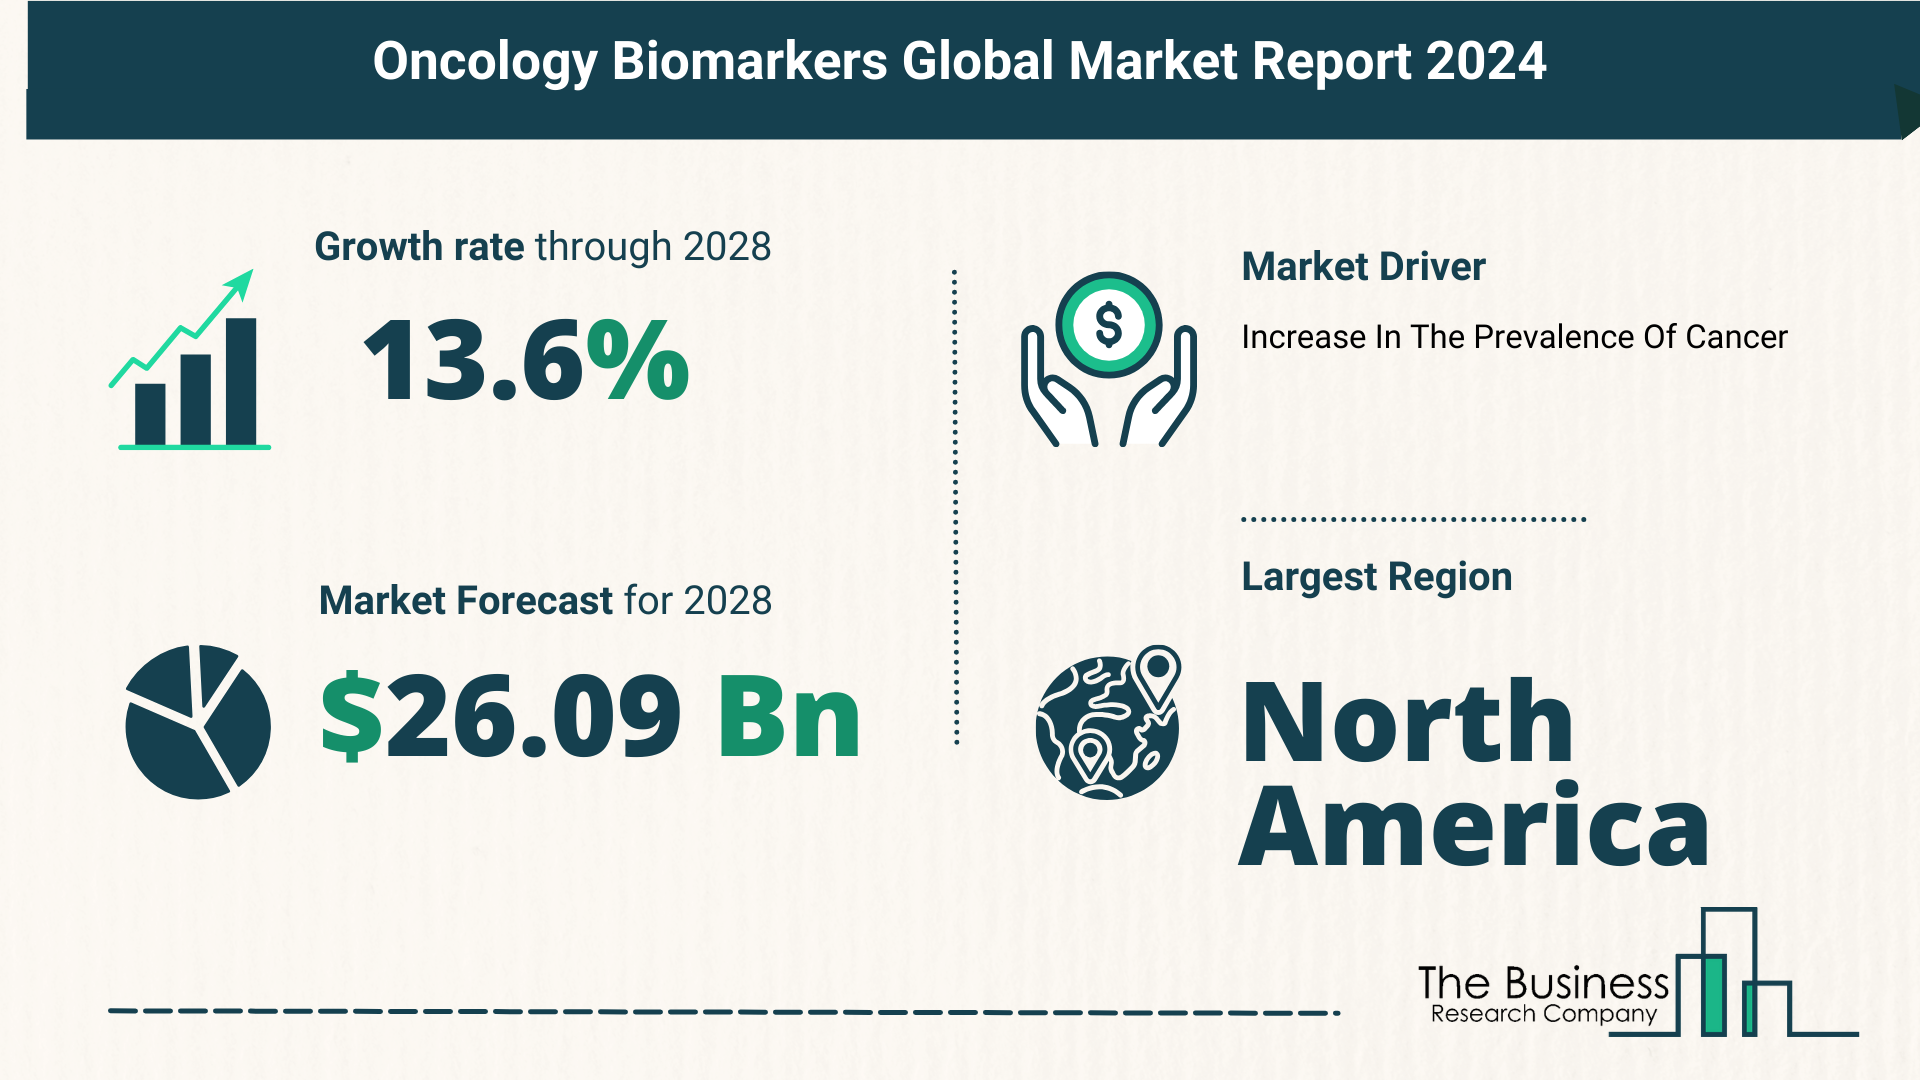 Global Oncology Biomarkers Market